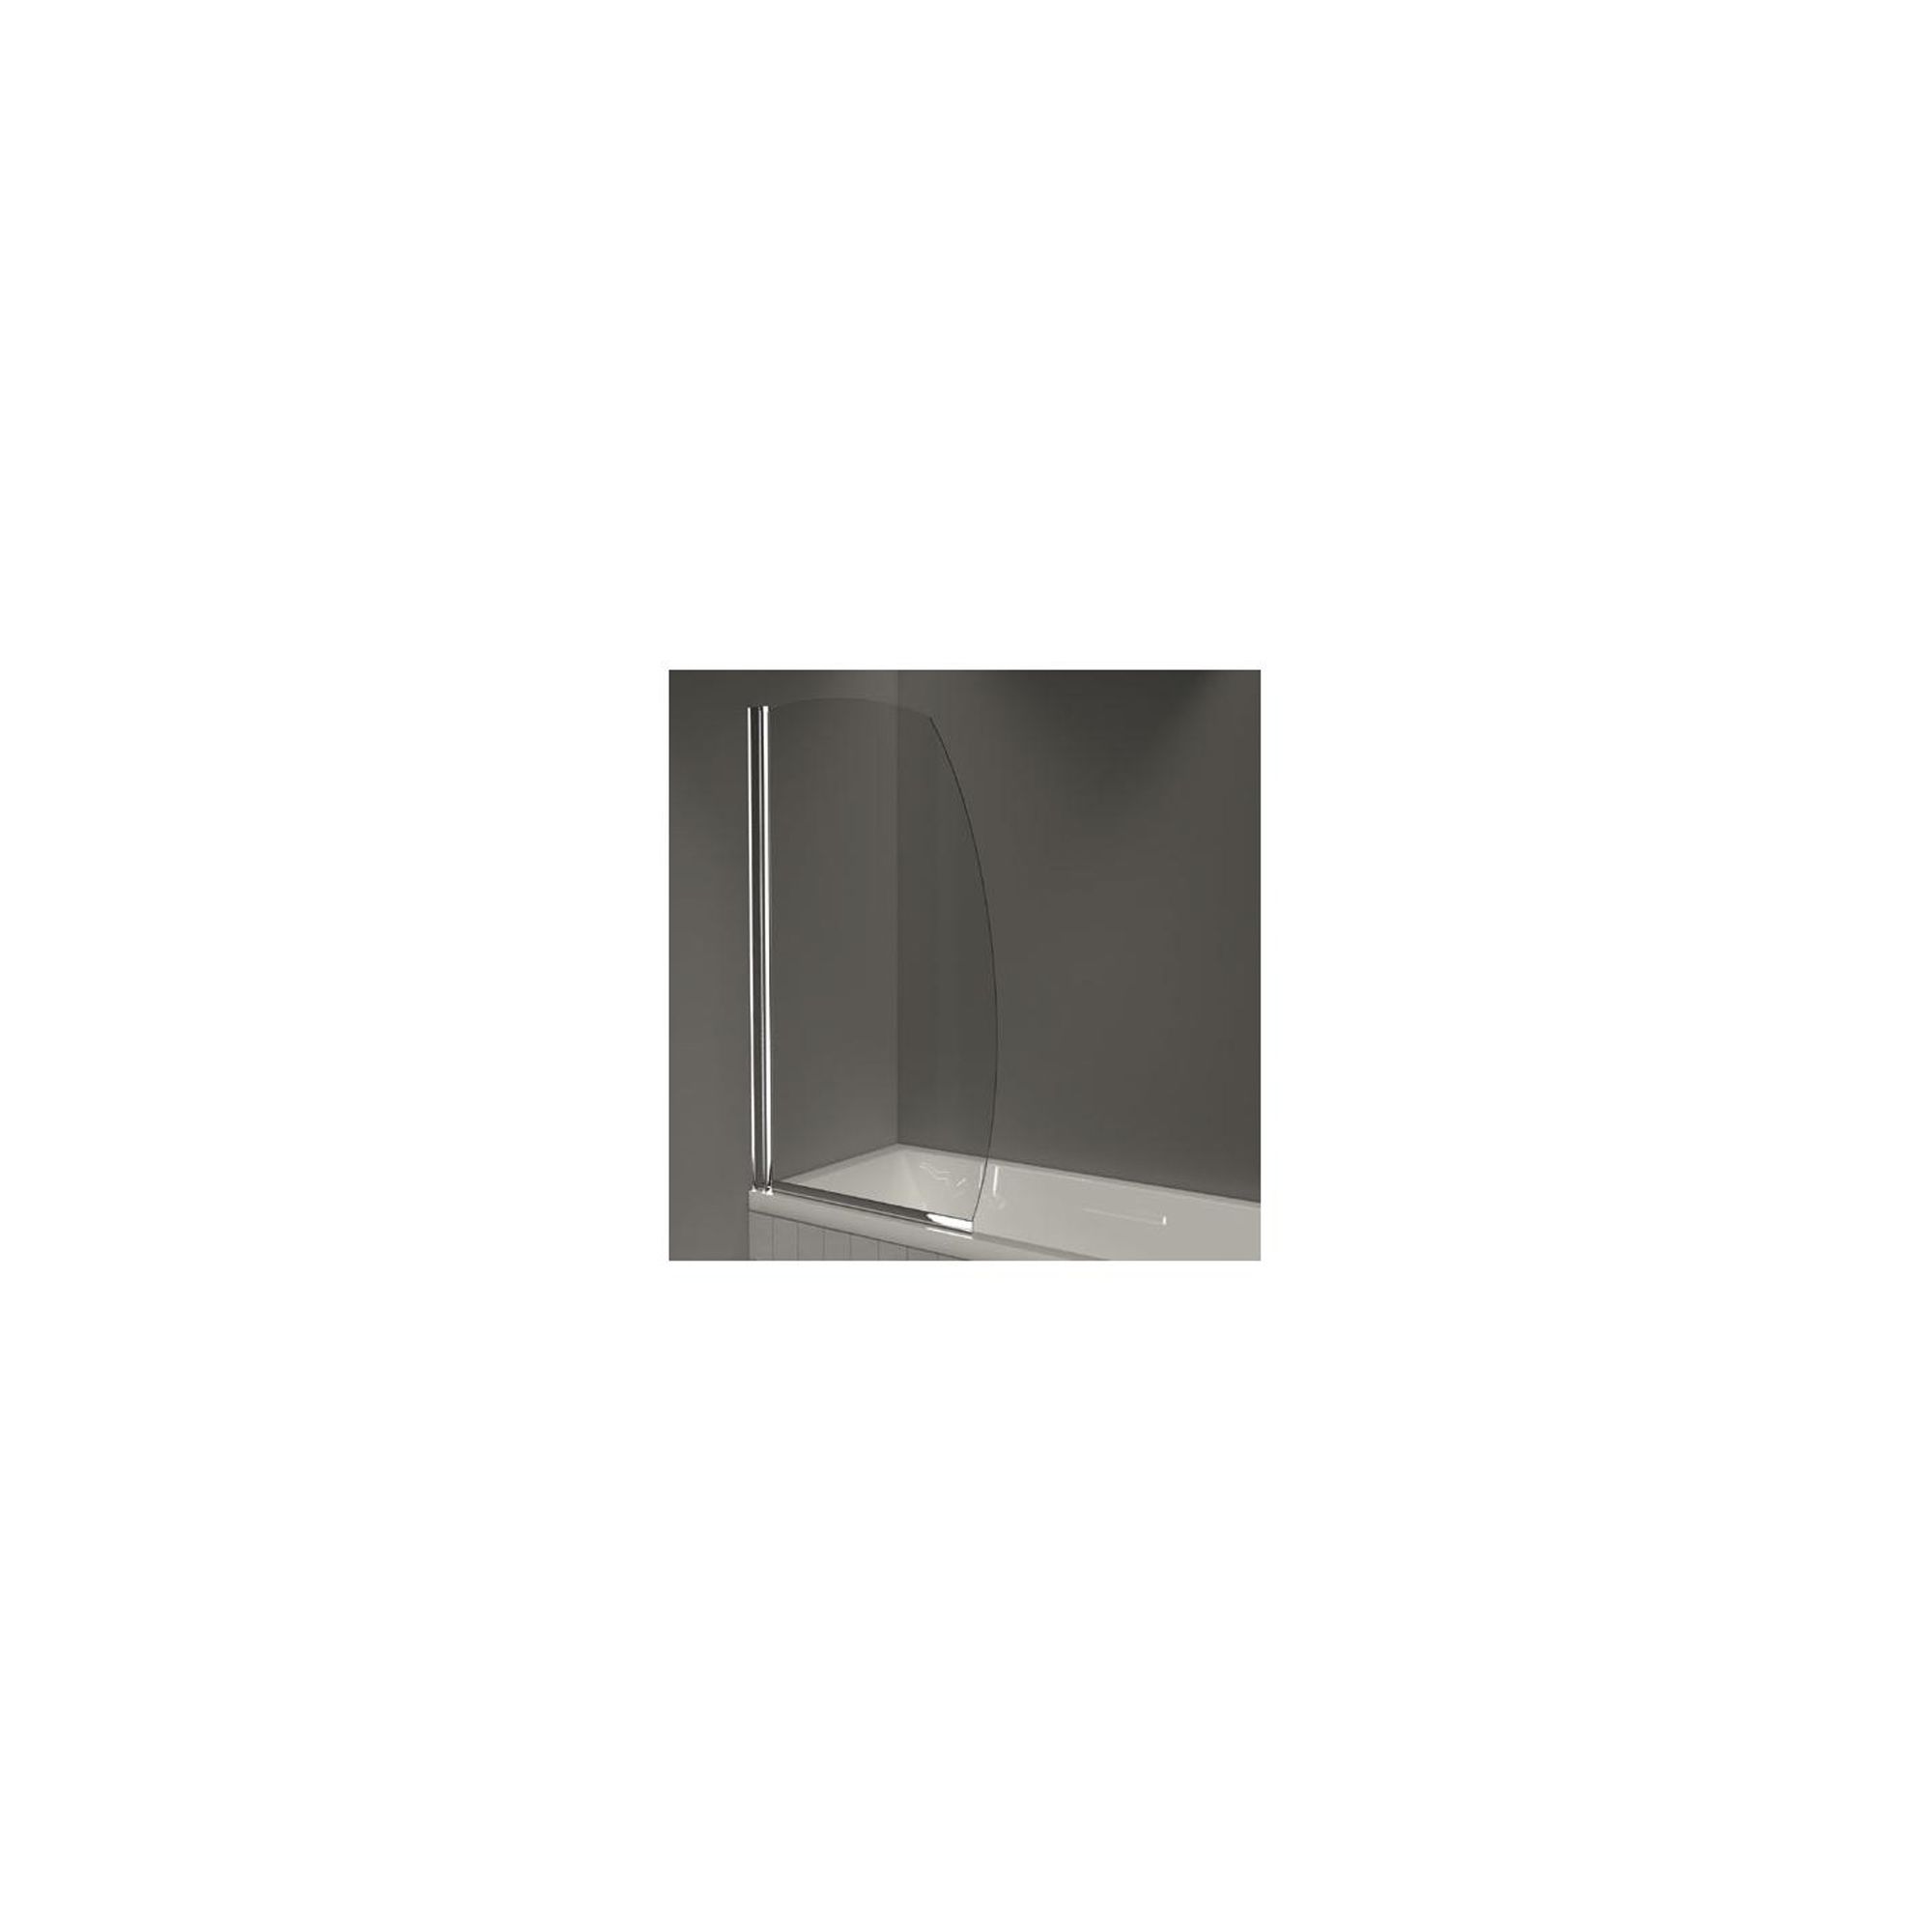 Merlyn OBS Single Panel Crescent Sail Bath Screen, 1500mm High x 900mm Wide, 6mm Glass at Tesco Direct